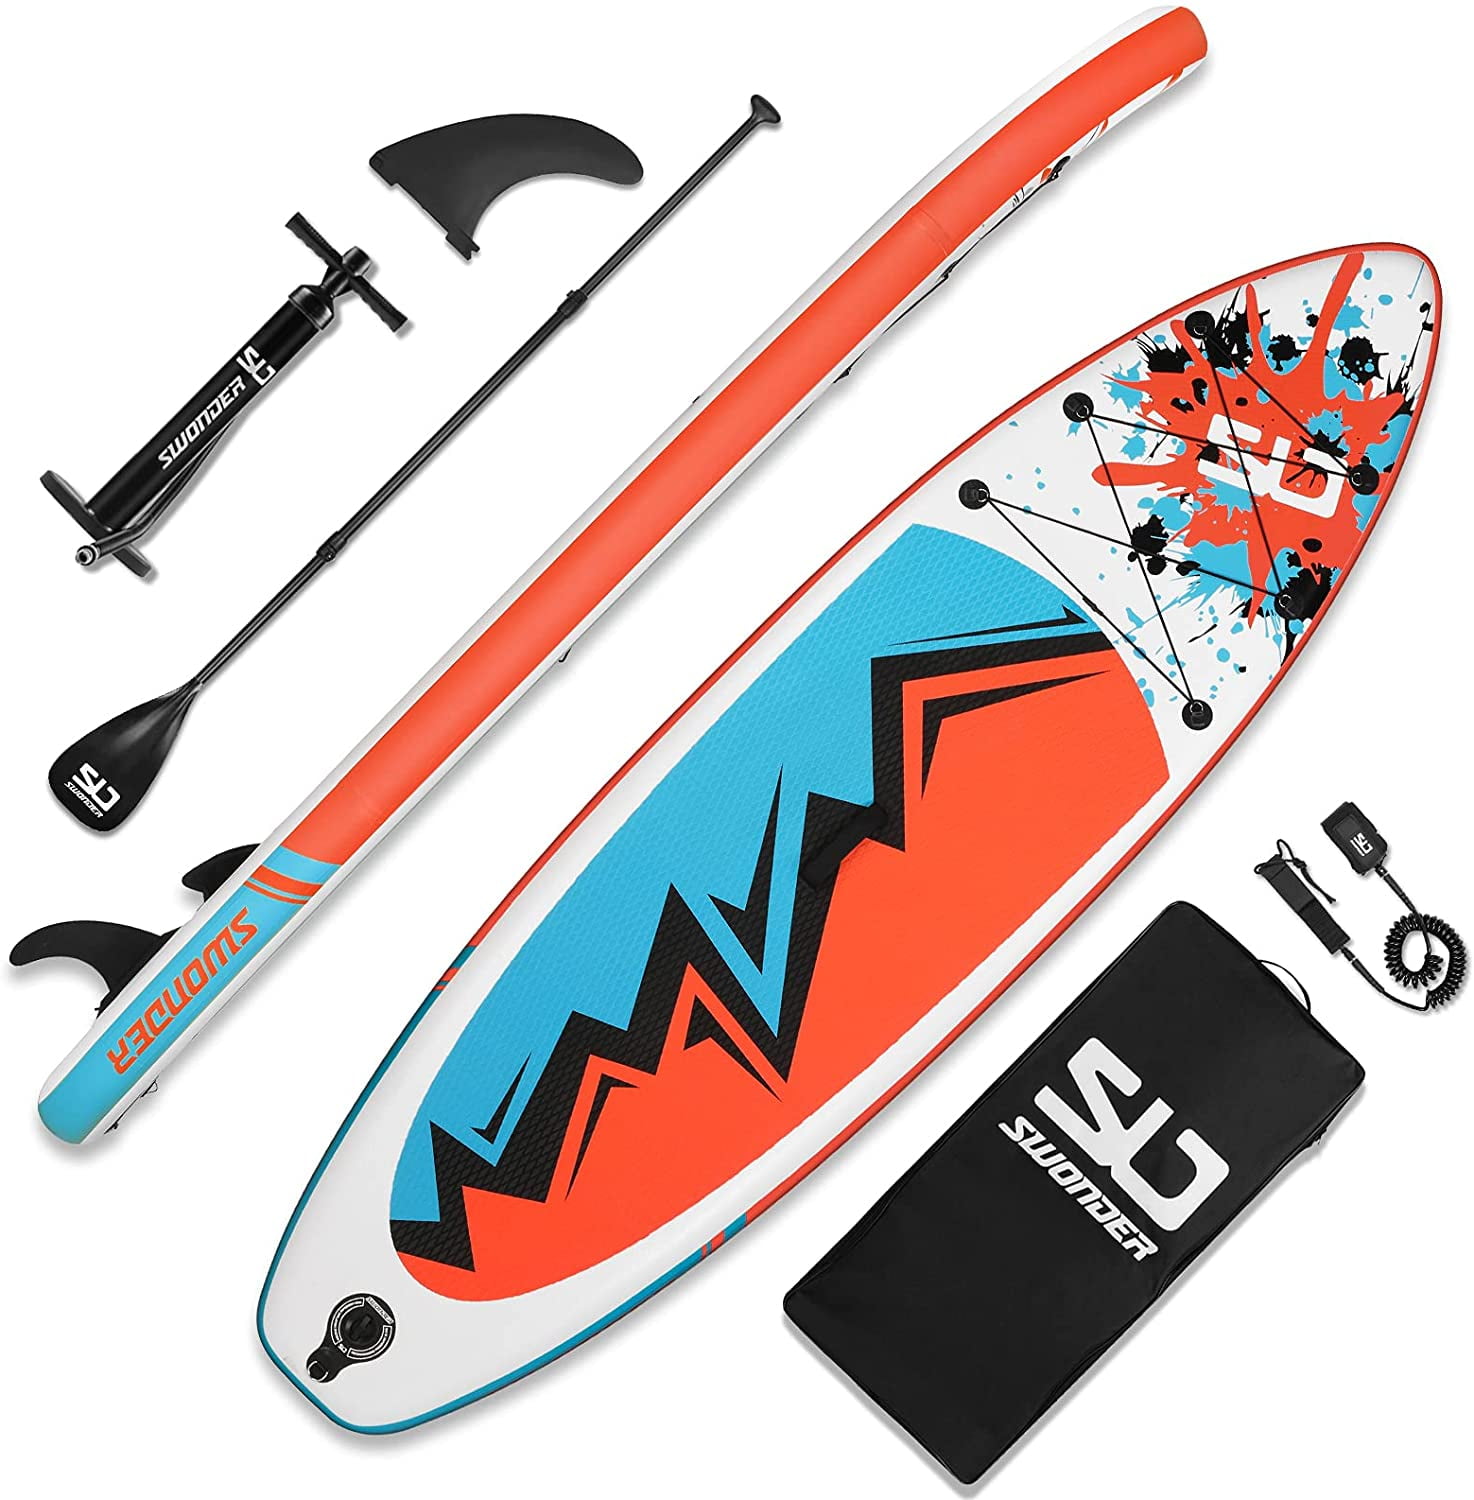 XQ MAX INFLATABLE SUP PADDLE BOARD KAYAK 10FT WITH ACCESSORIES Tribal Blue XQ Max 